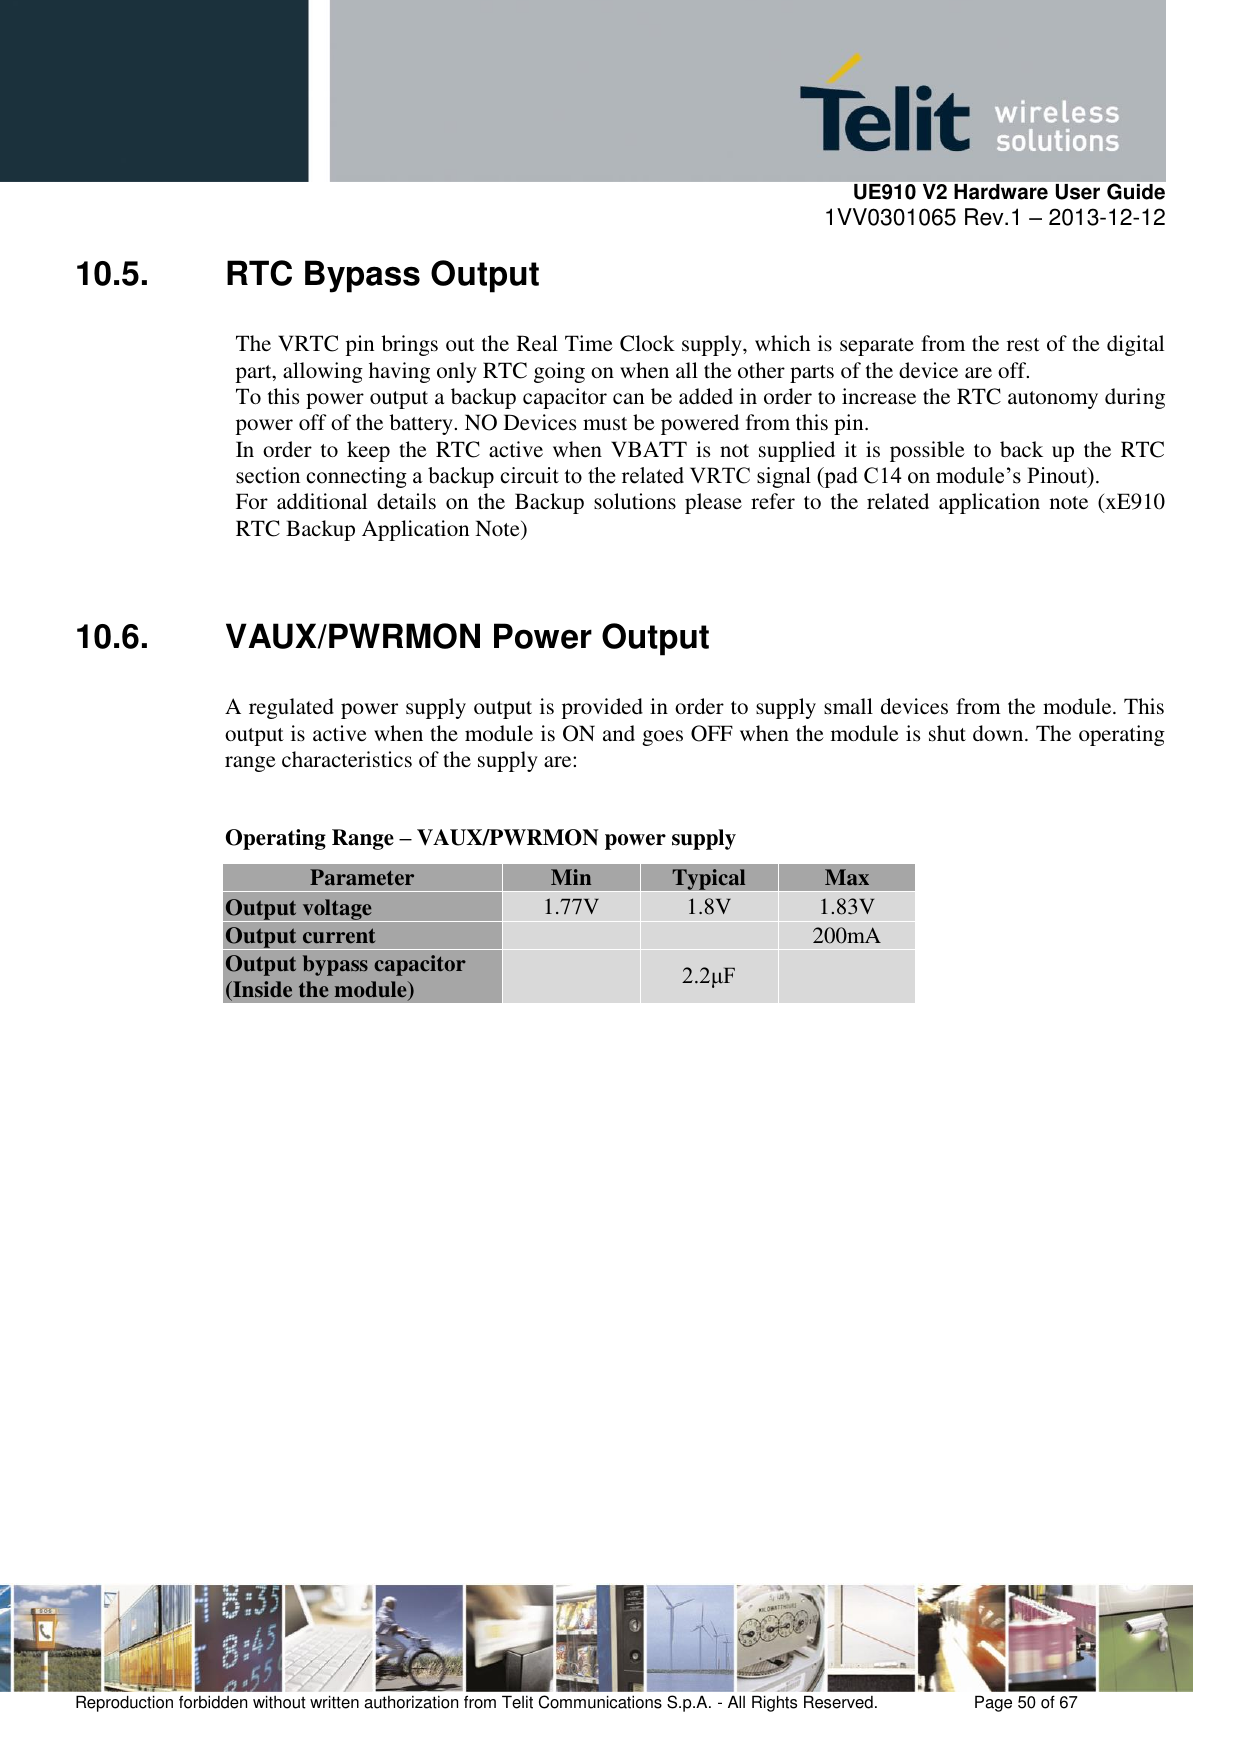     UE910 V2 Hardware User Guide 1VV0301065 Rev.1 – 2013-12-12  Reproduction forbidden without written authorization from Telit Communications S.p.A. - All Rights Reserved.    Page 50 of 67                                                     10.5.  RTC Bypass Output The VRTC pin brings out the Real Time Clock supply, which is separate from the rest of the digital part, allowing having only RTC going on when all the other parts of the device are off. To this power output a backup capacitor can be added in order to increase the RTC autonomy during power off of the battery. NO Devices must be powered from this pin. In order to keep the RTC active when VBATT is not supplied it is possible to back up the RTC section connecting a backup circuit to the related VRTC signal (pad C14 on module’s Pinout). For additional details on the Backup solutions please refer to the related application note (xE910 RTC Backup Application Note)  10.6.  VAUX/PWRMON Power Output A regulated power supply output is provided in order to supply small devices from the module. This output is active when the module is ON and goes OFF when the module is shut down. The operating range characteristics of the supply are:  Operating Range – VAUX/PWRMON power supply Parameter Min Typical Max Output voltage 1.77V 1.8V 1.83V Output current   200mA Output bypass capacitor (Inside the module)  2.2μF  